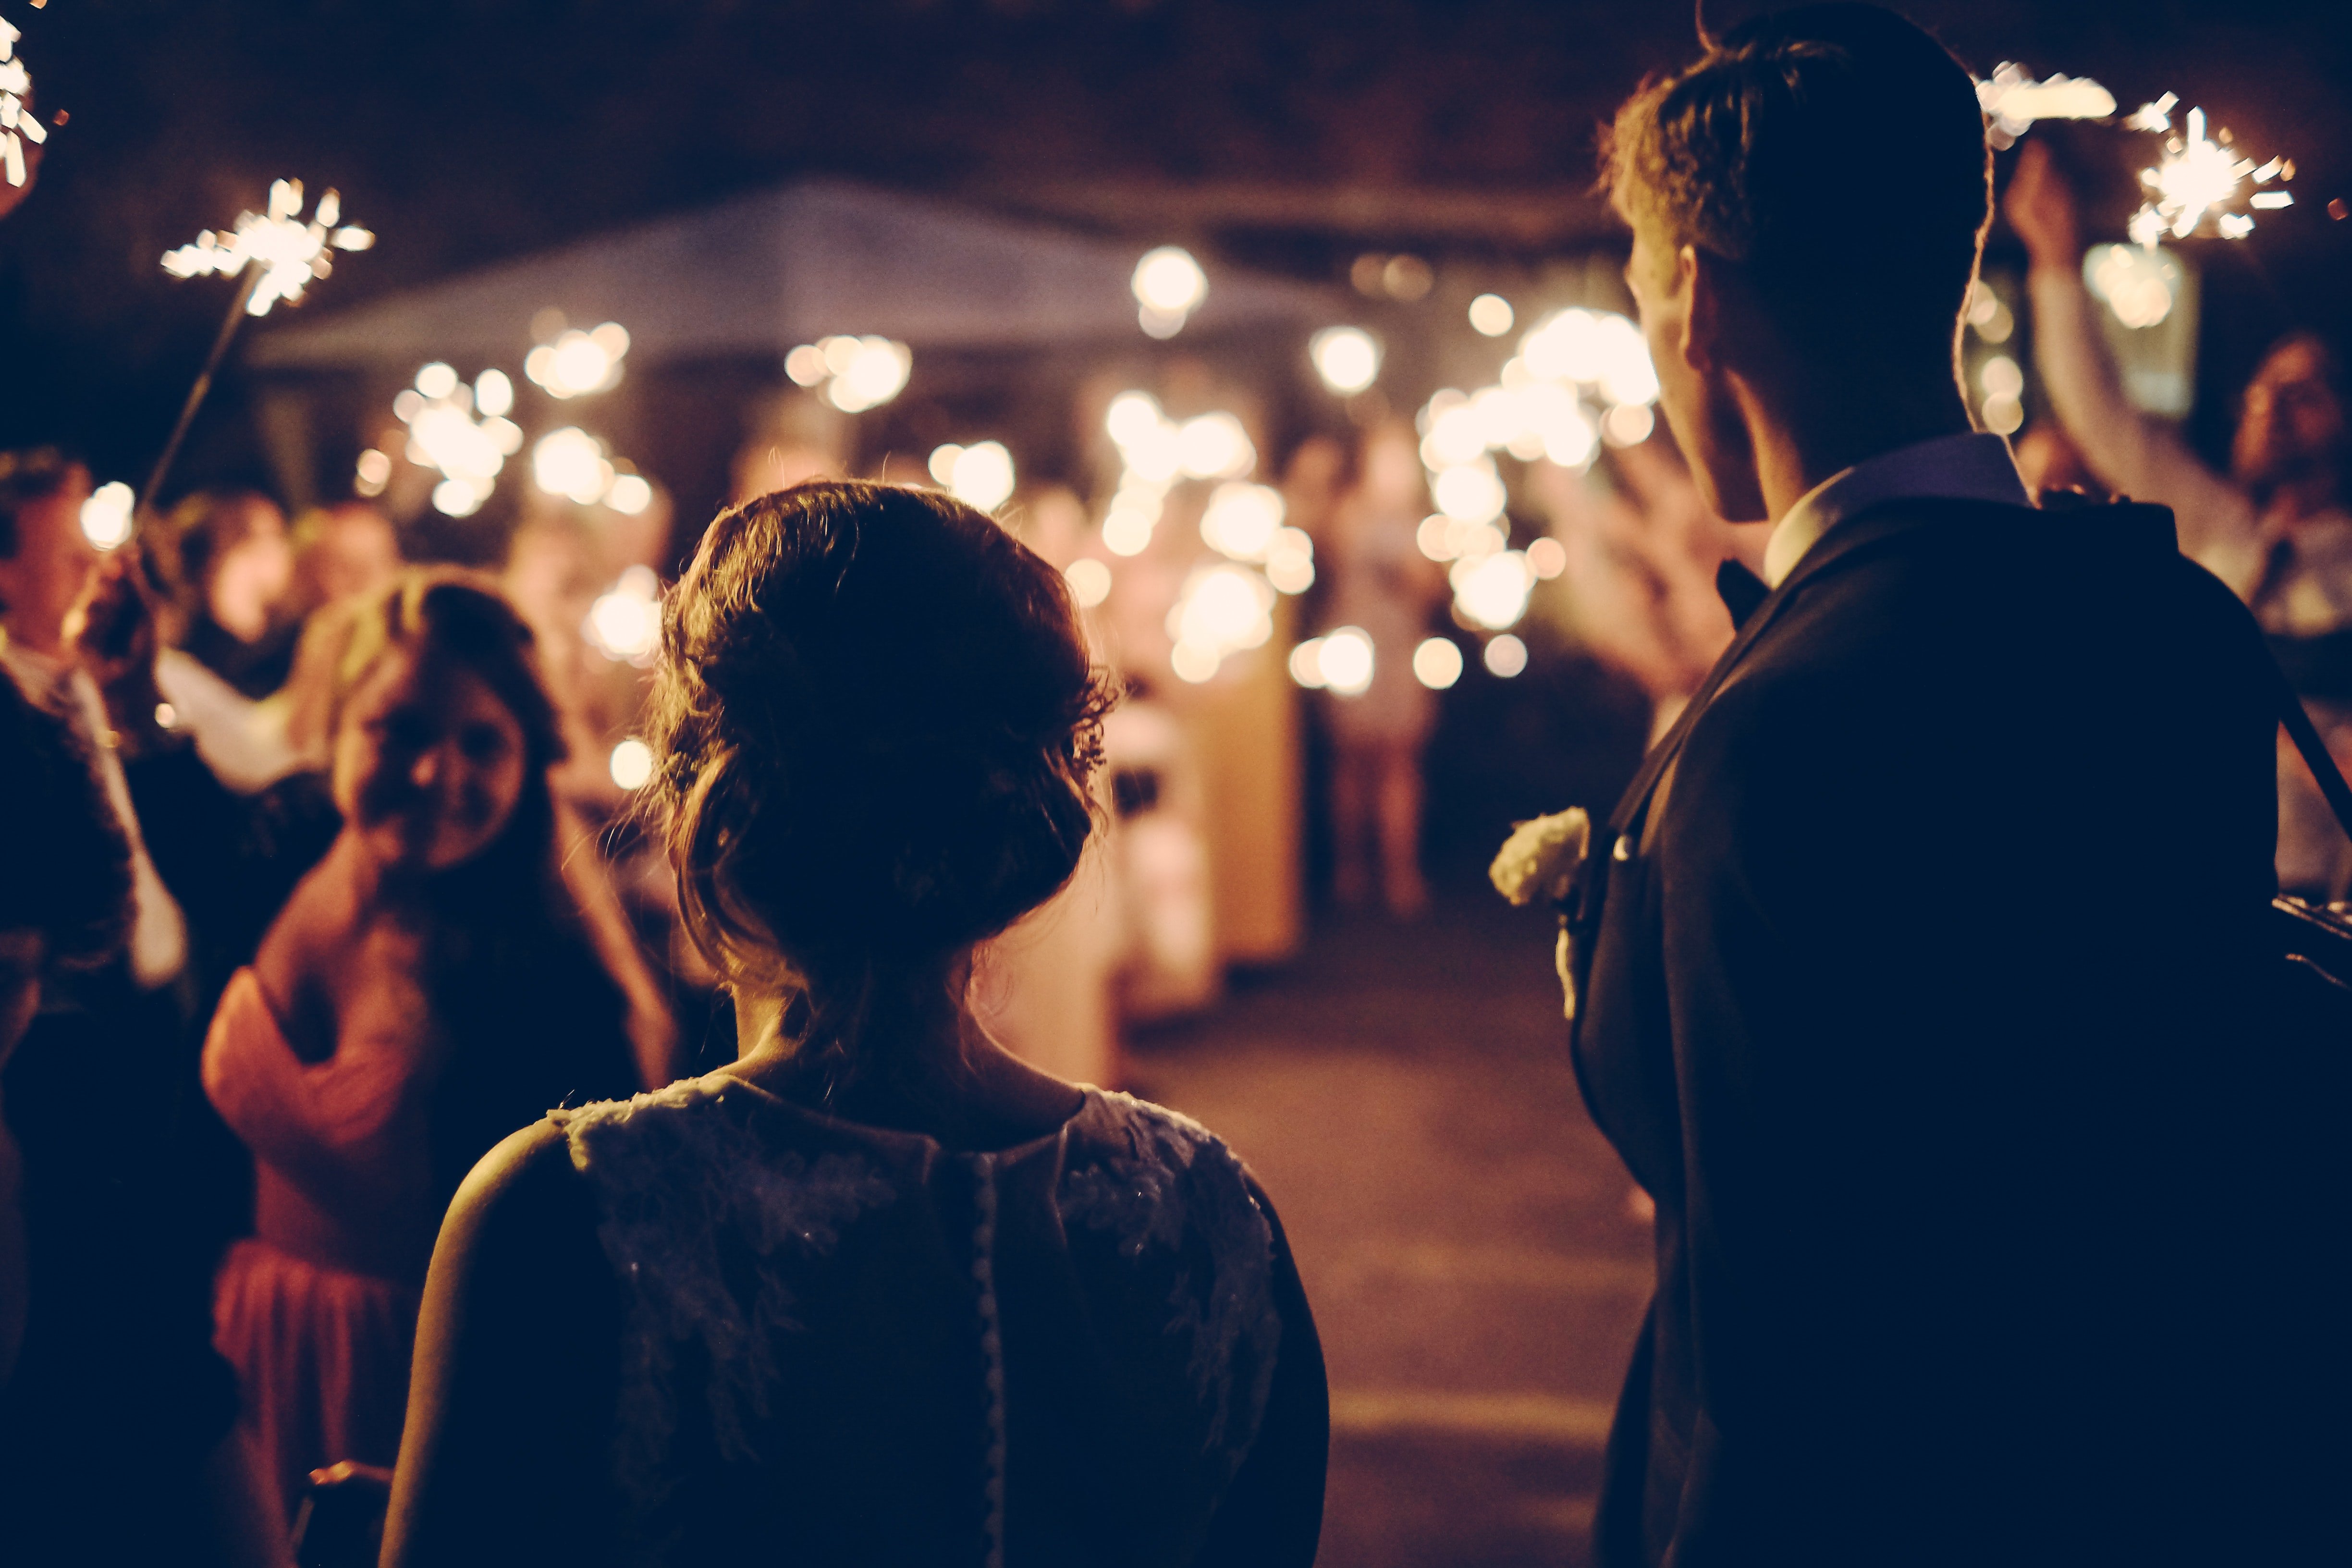 A newly-wed couple at their wedding reception | Source: Unsplash